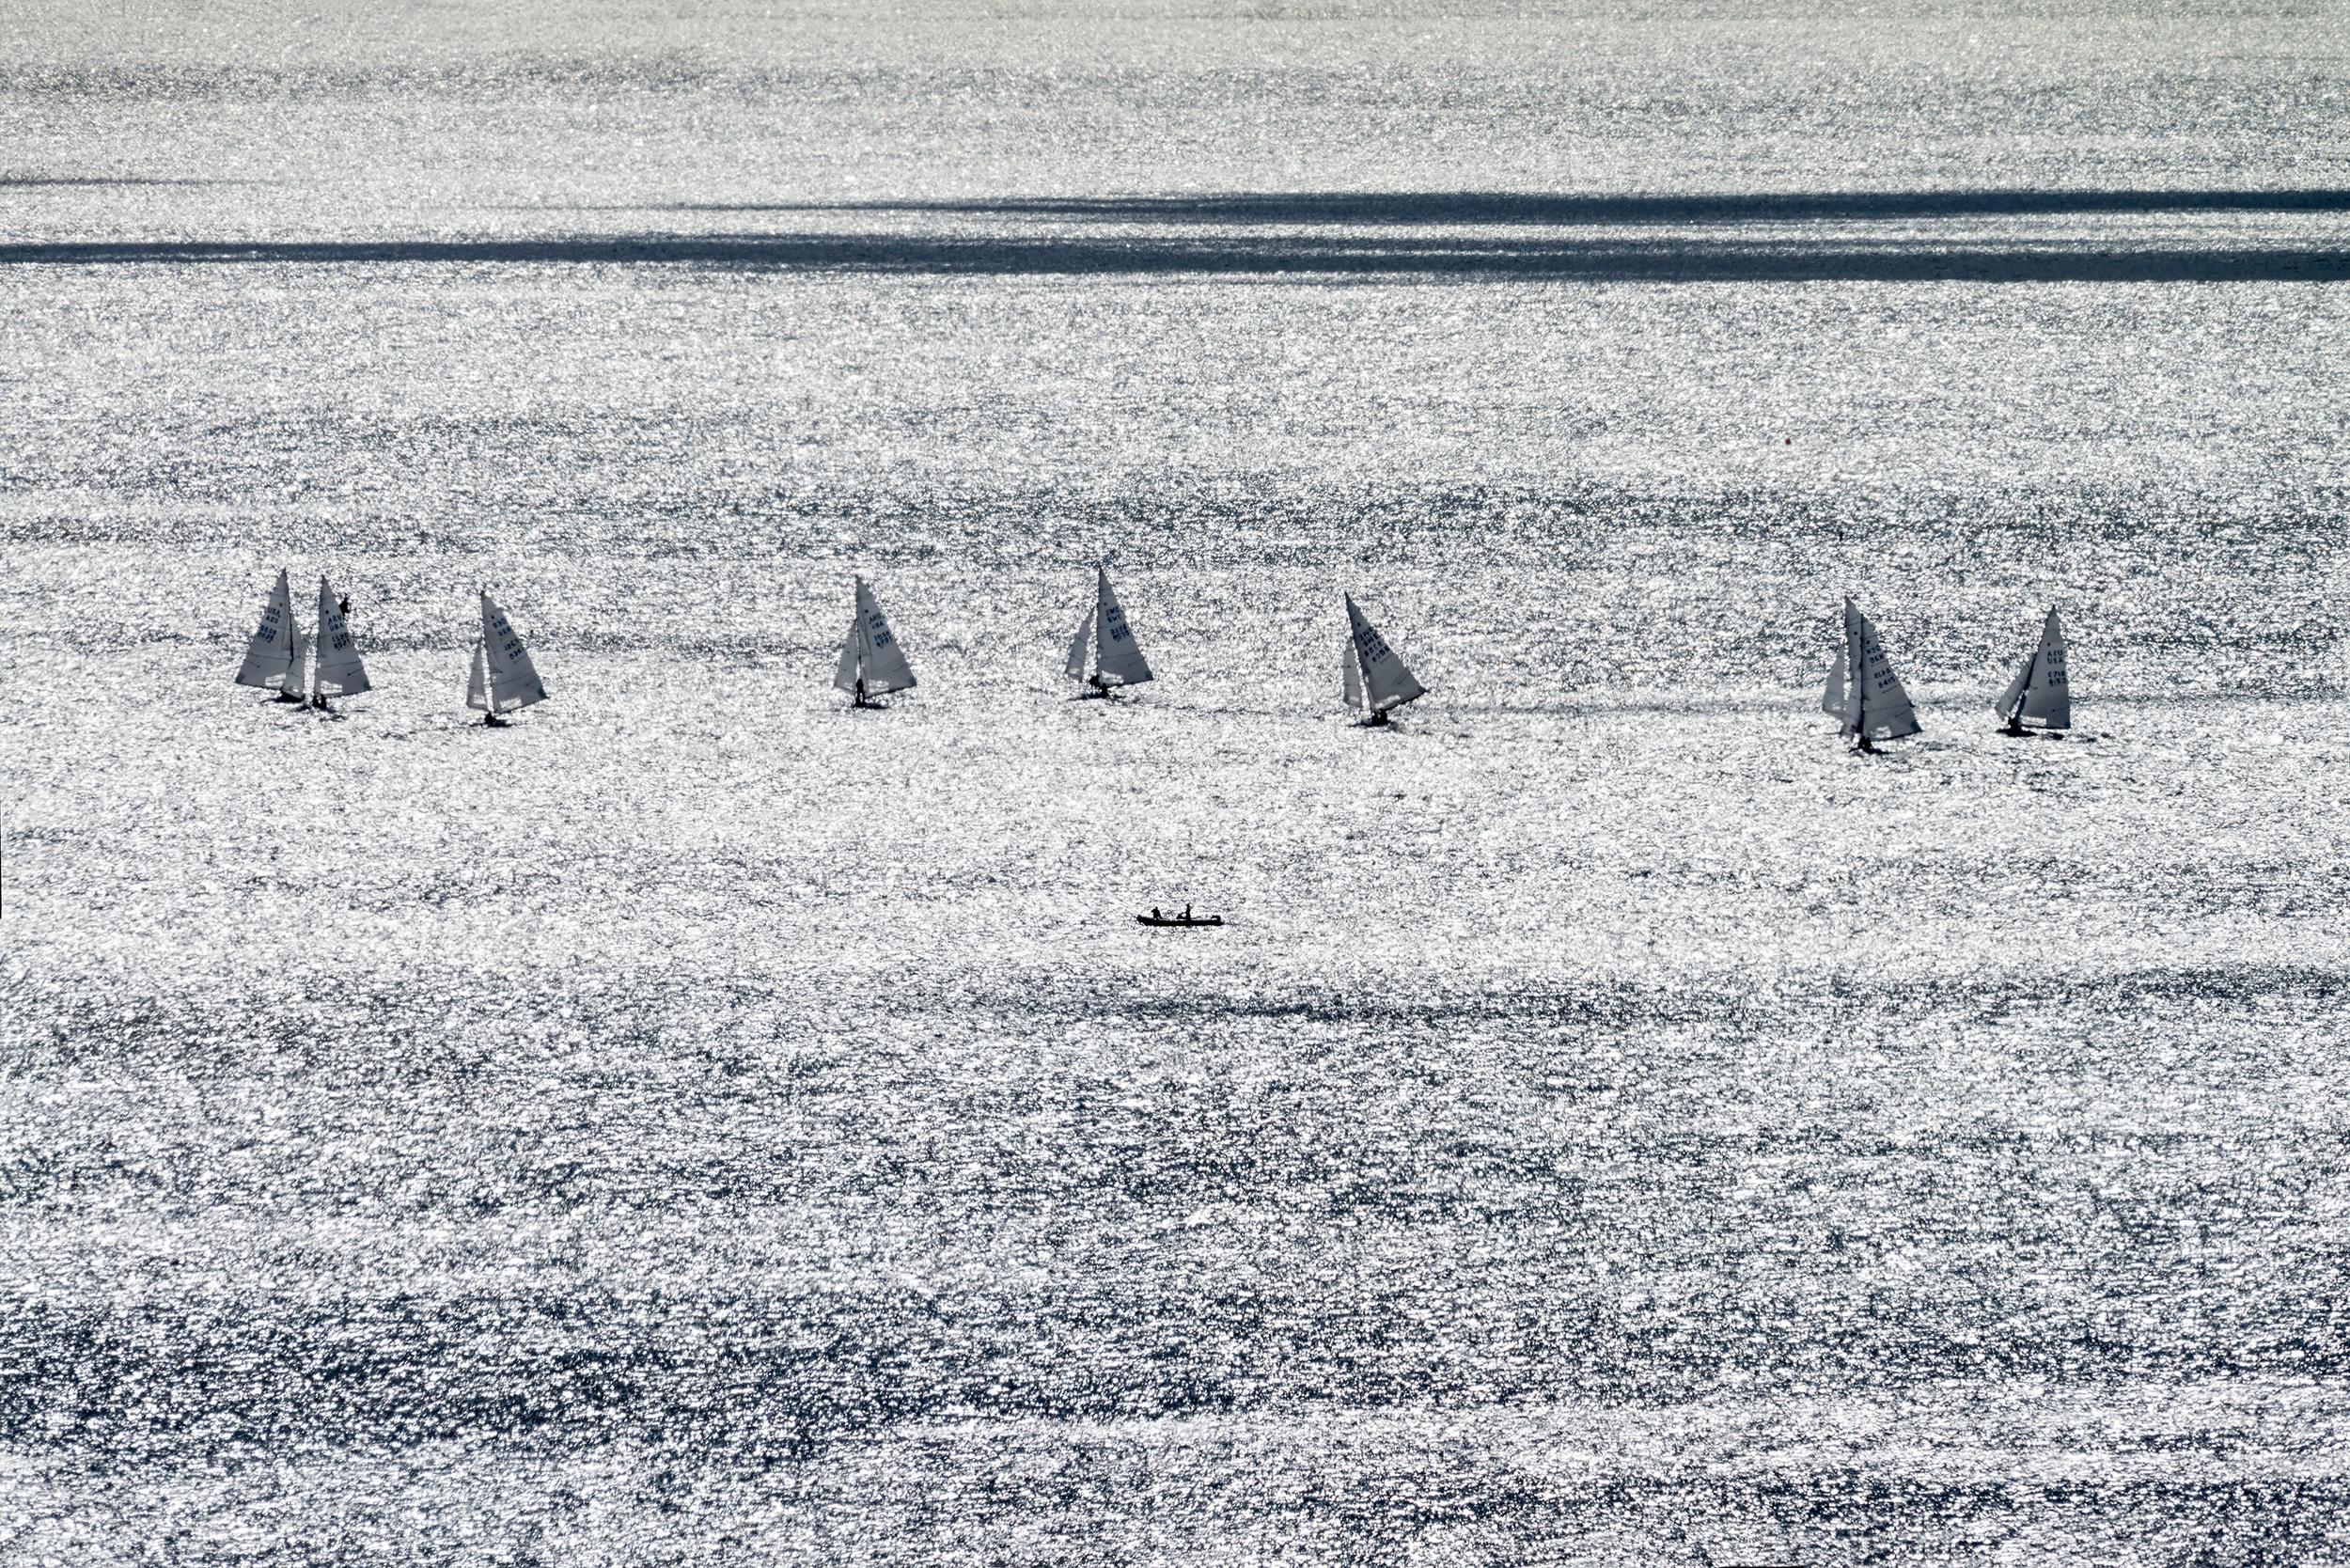 Sail Boats with Two Men in a Boat on a Silver Gray Sea